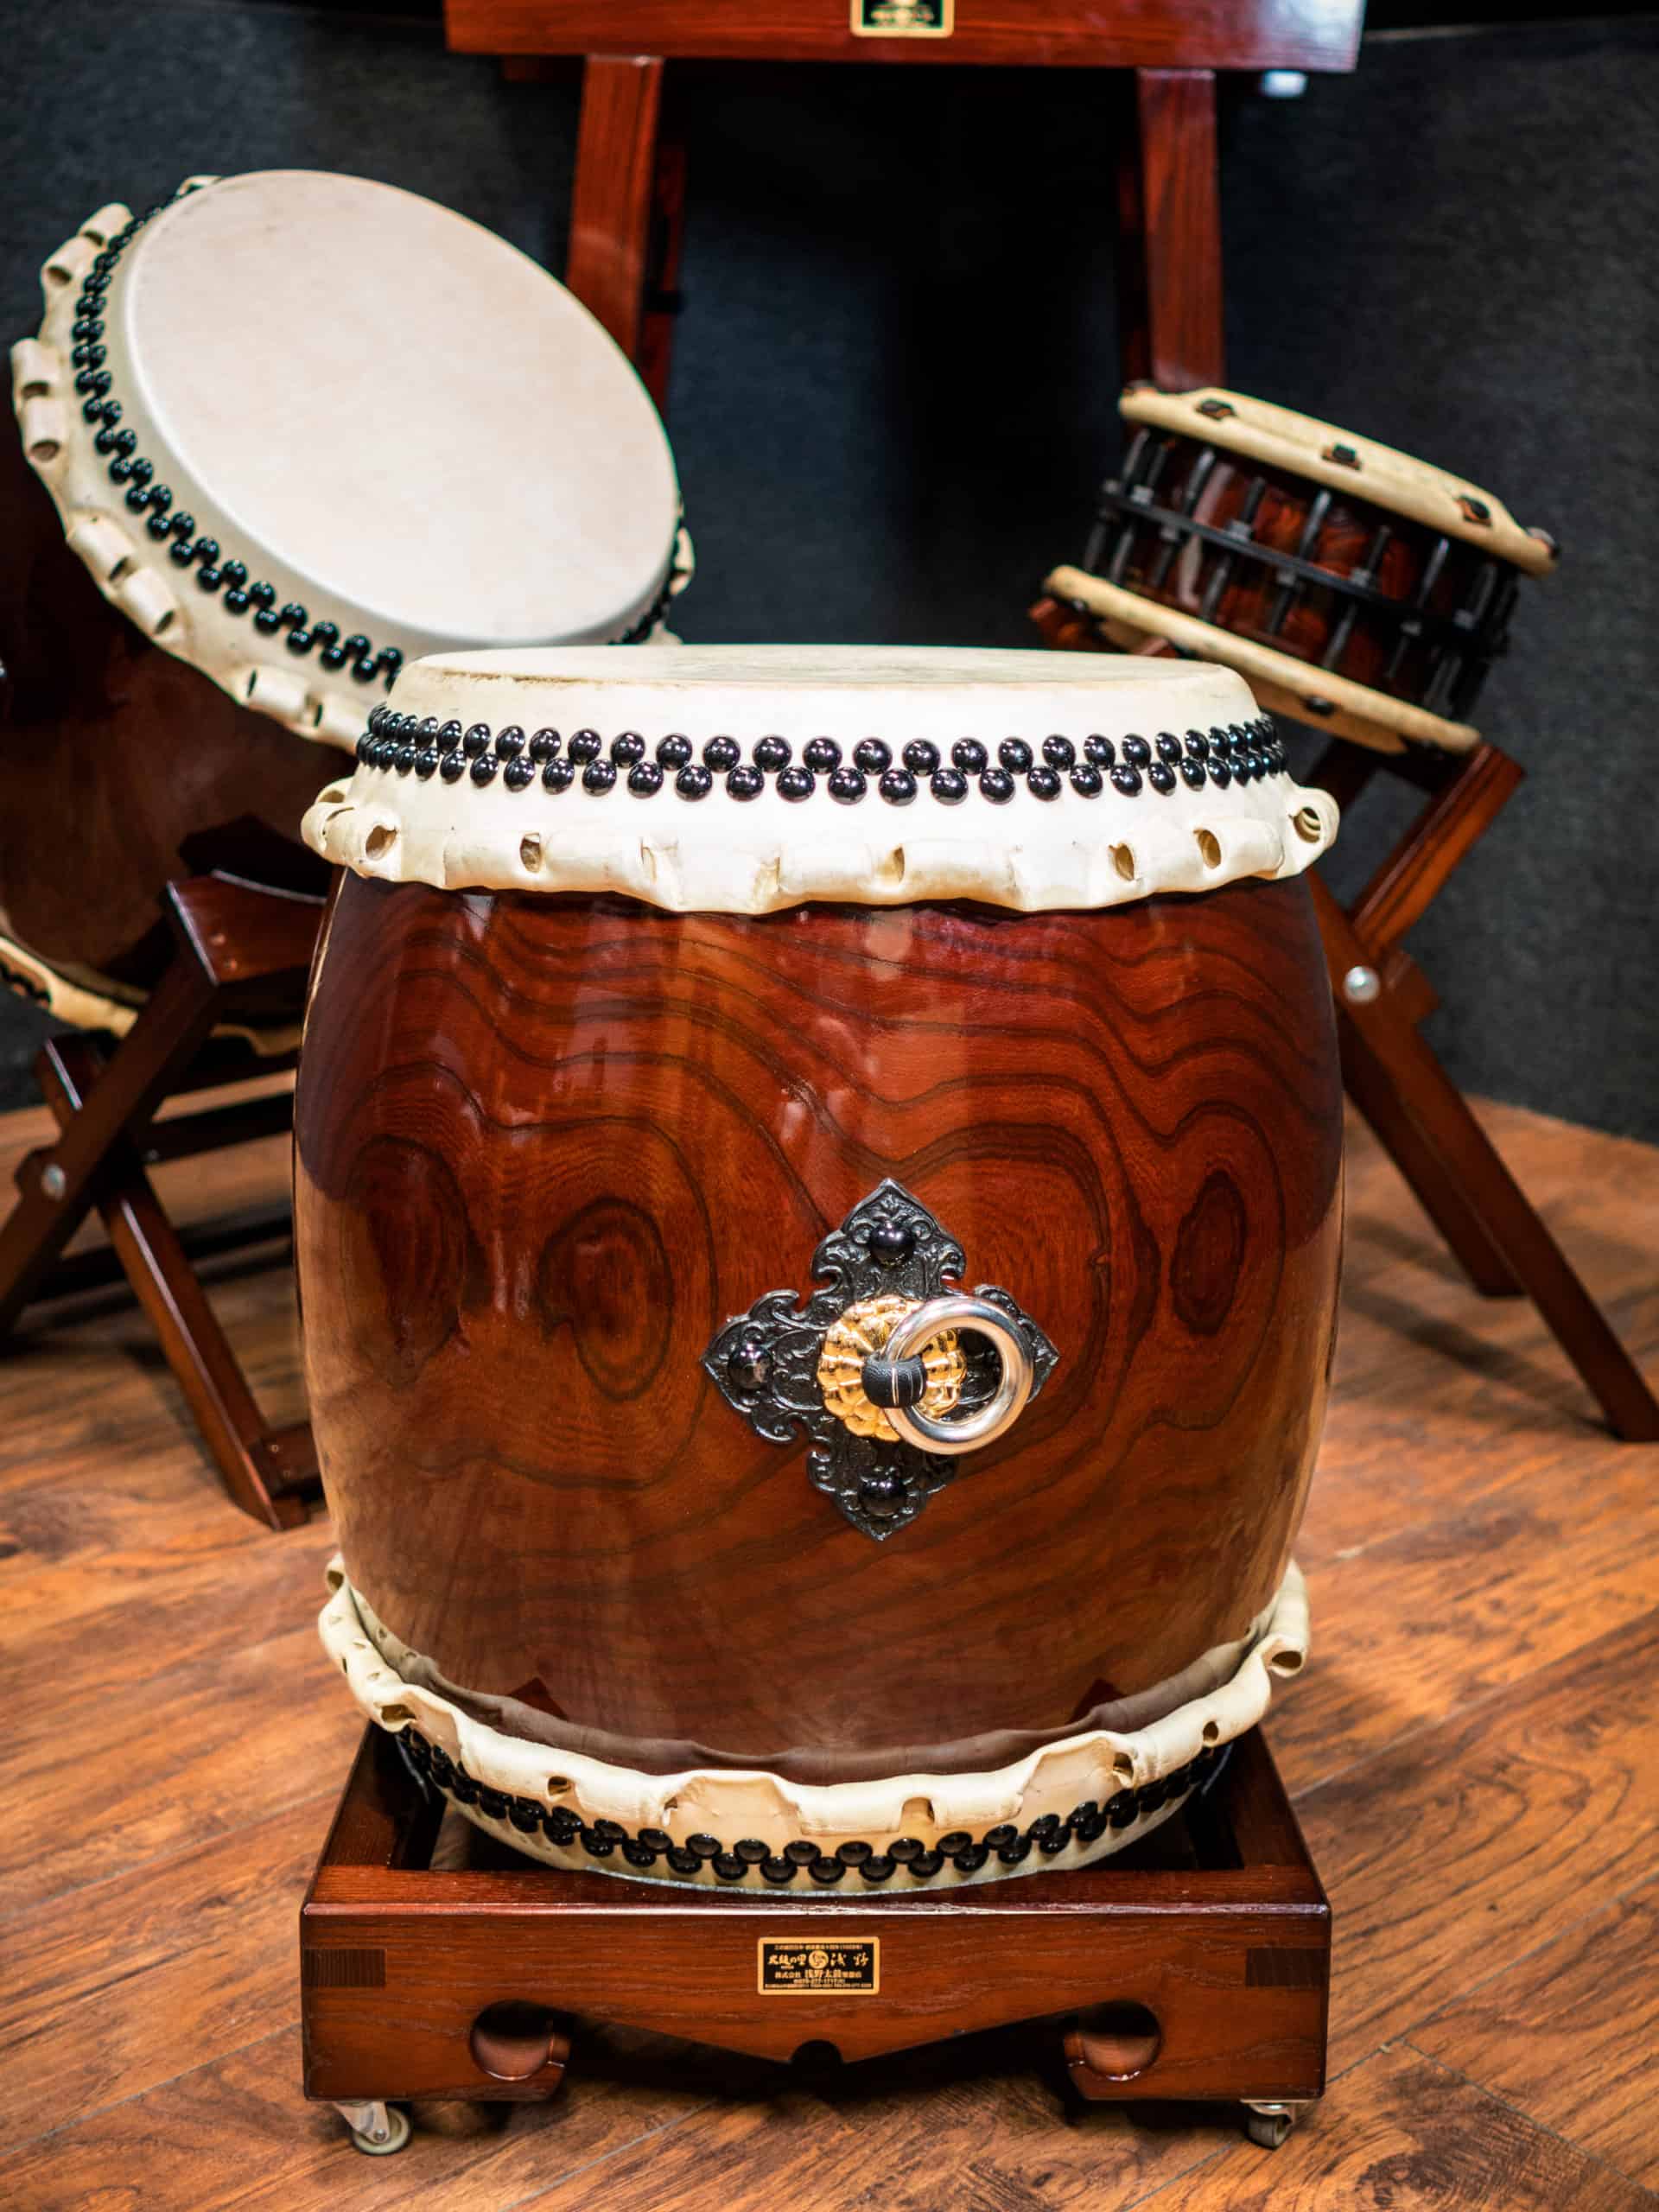 where to buy taiko in the united states